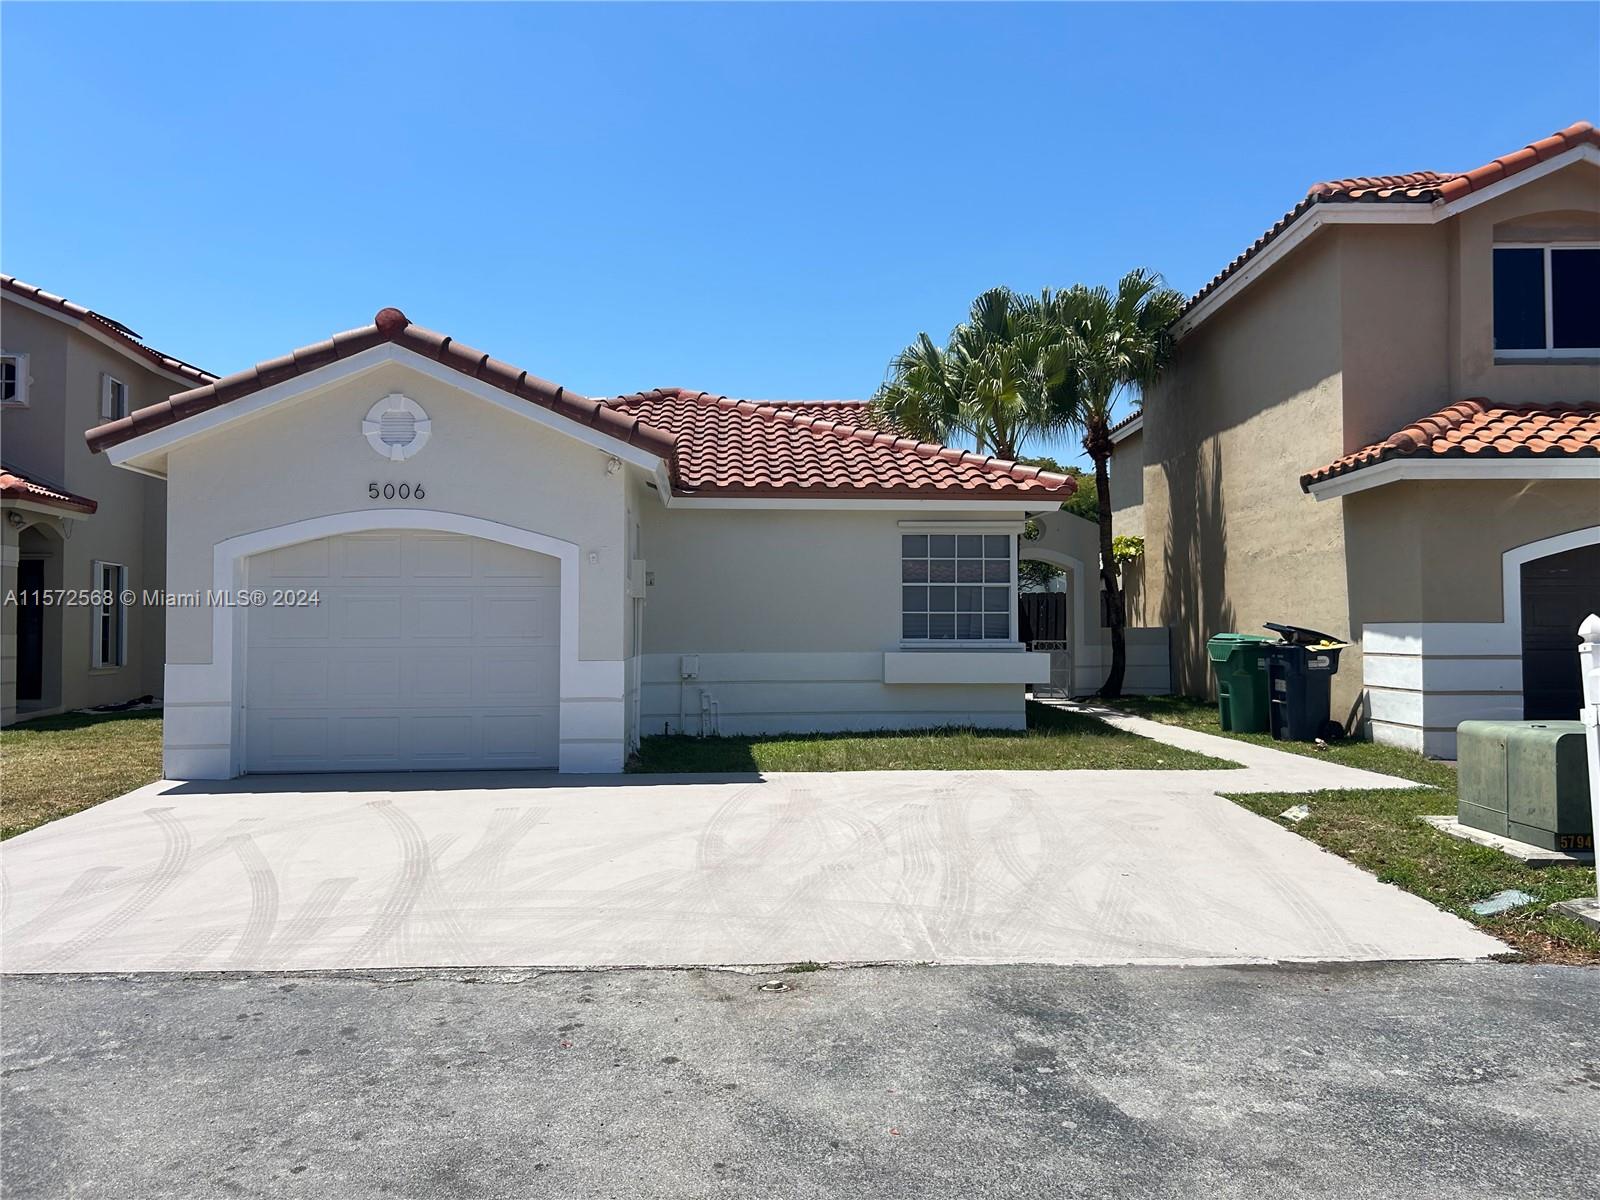 Property for Sale at Address Not Disclosed, Miami, Broward County, Florida - Bedrooms: 3 
Bathrooms: 2  - $614,900